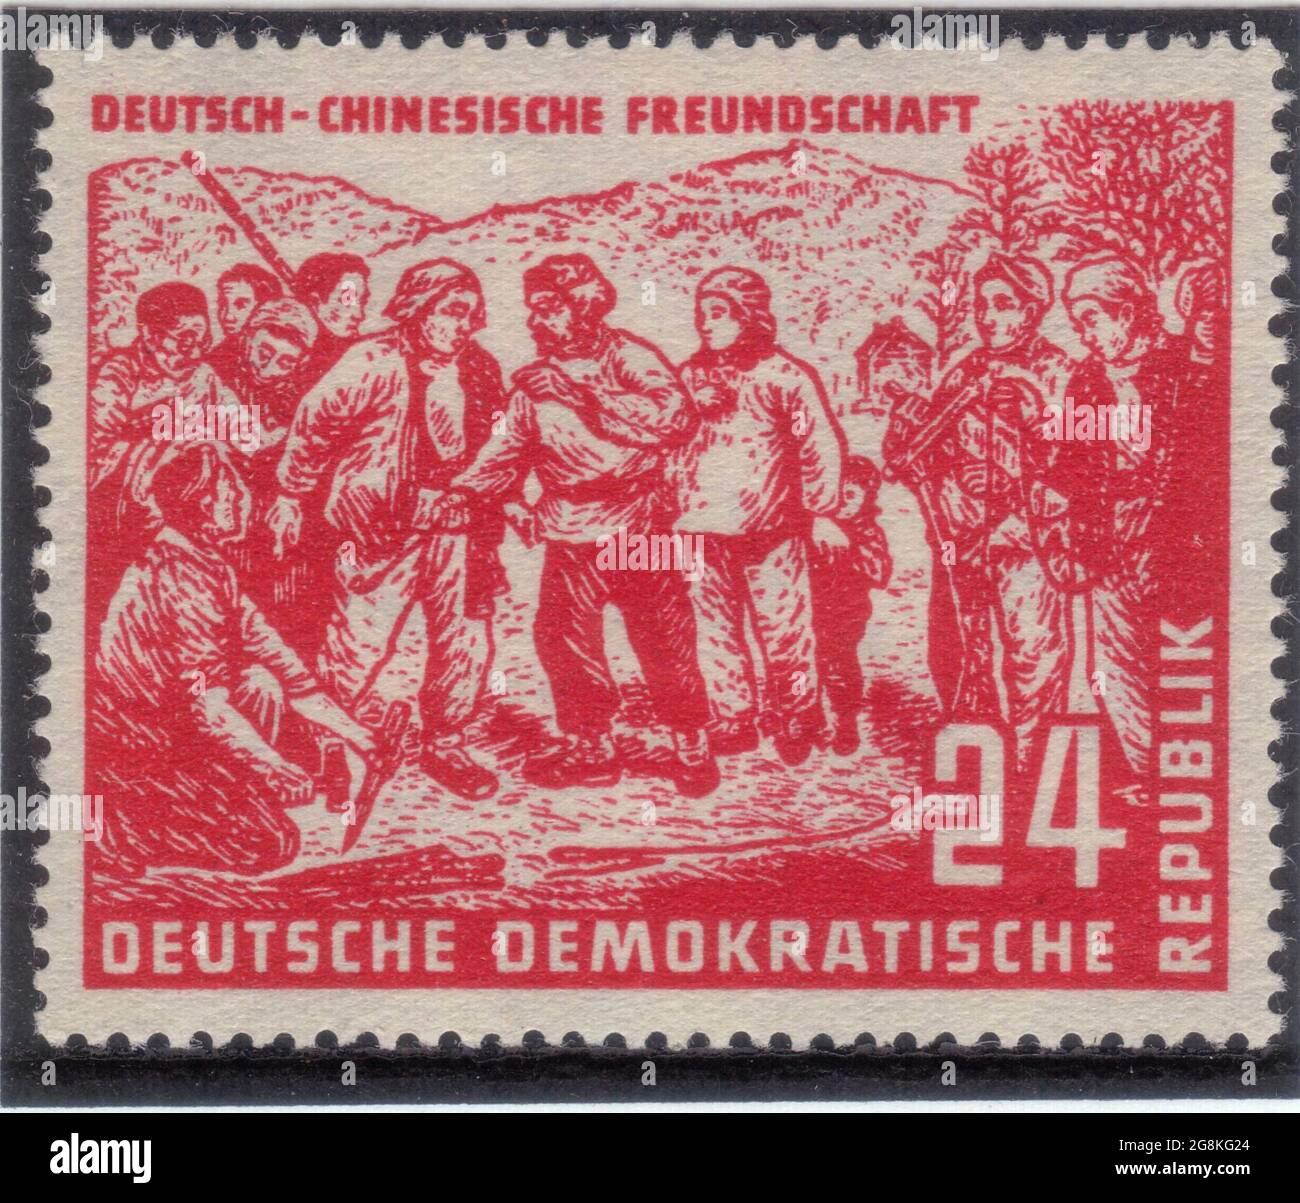 DDR [Deutsche Demokratische Republik (German Democratic Republic), official name of the former East Germany] depicting the German-Chinese Friendship 24pf Red issued July 10 1951 Stock Photo